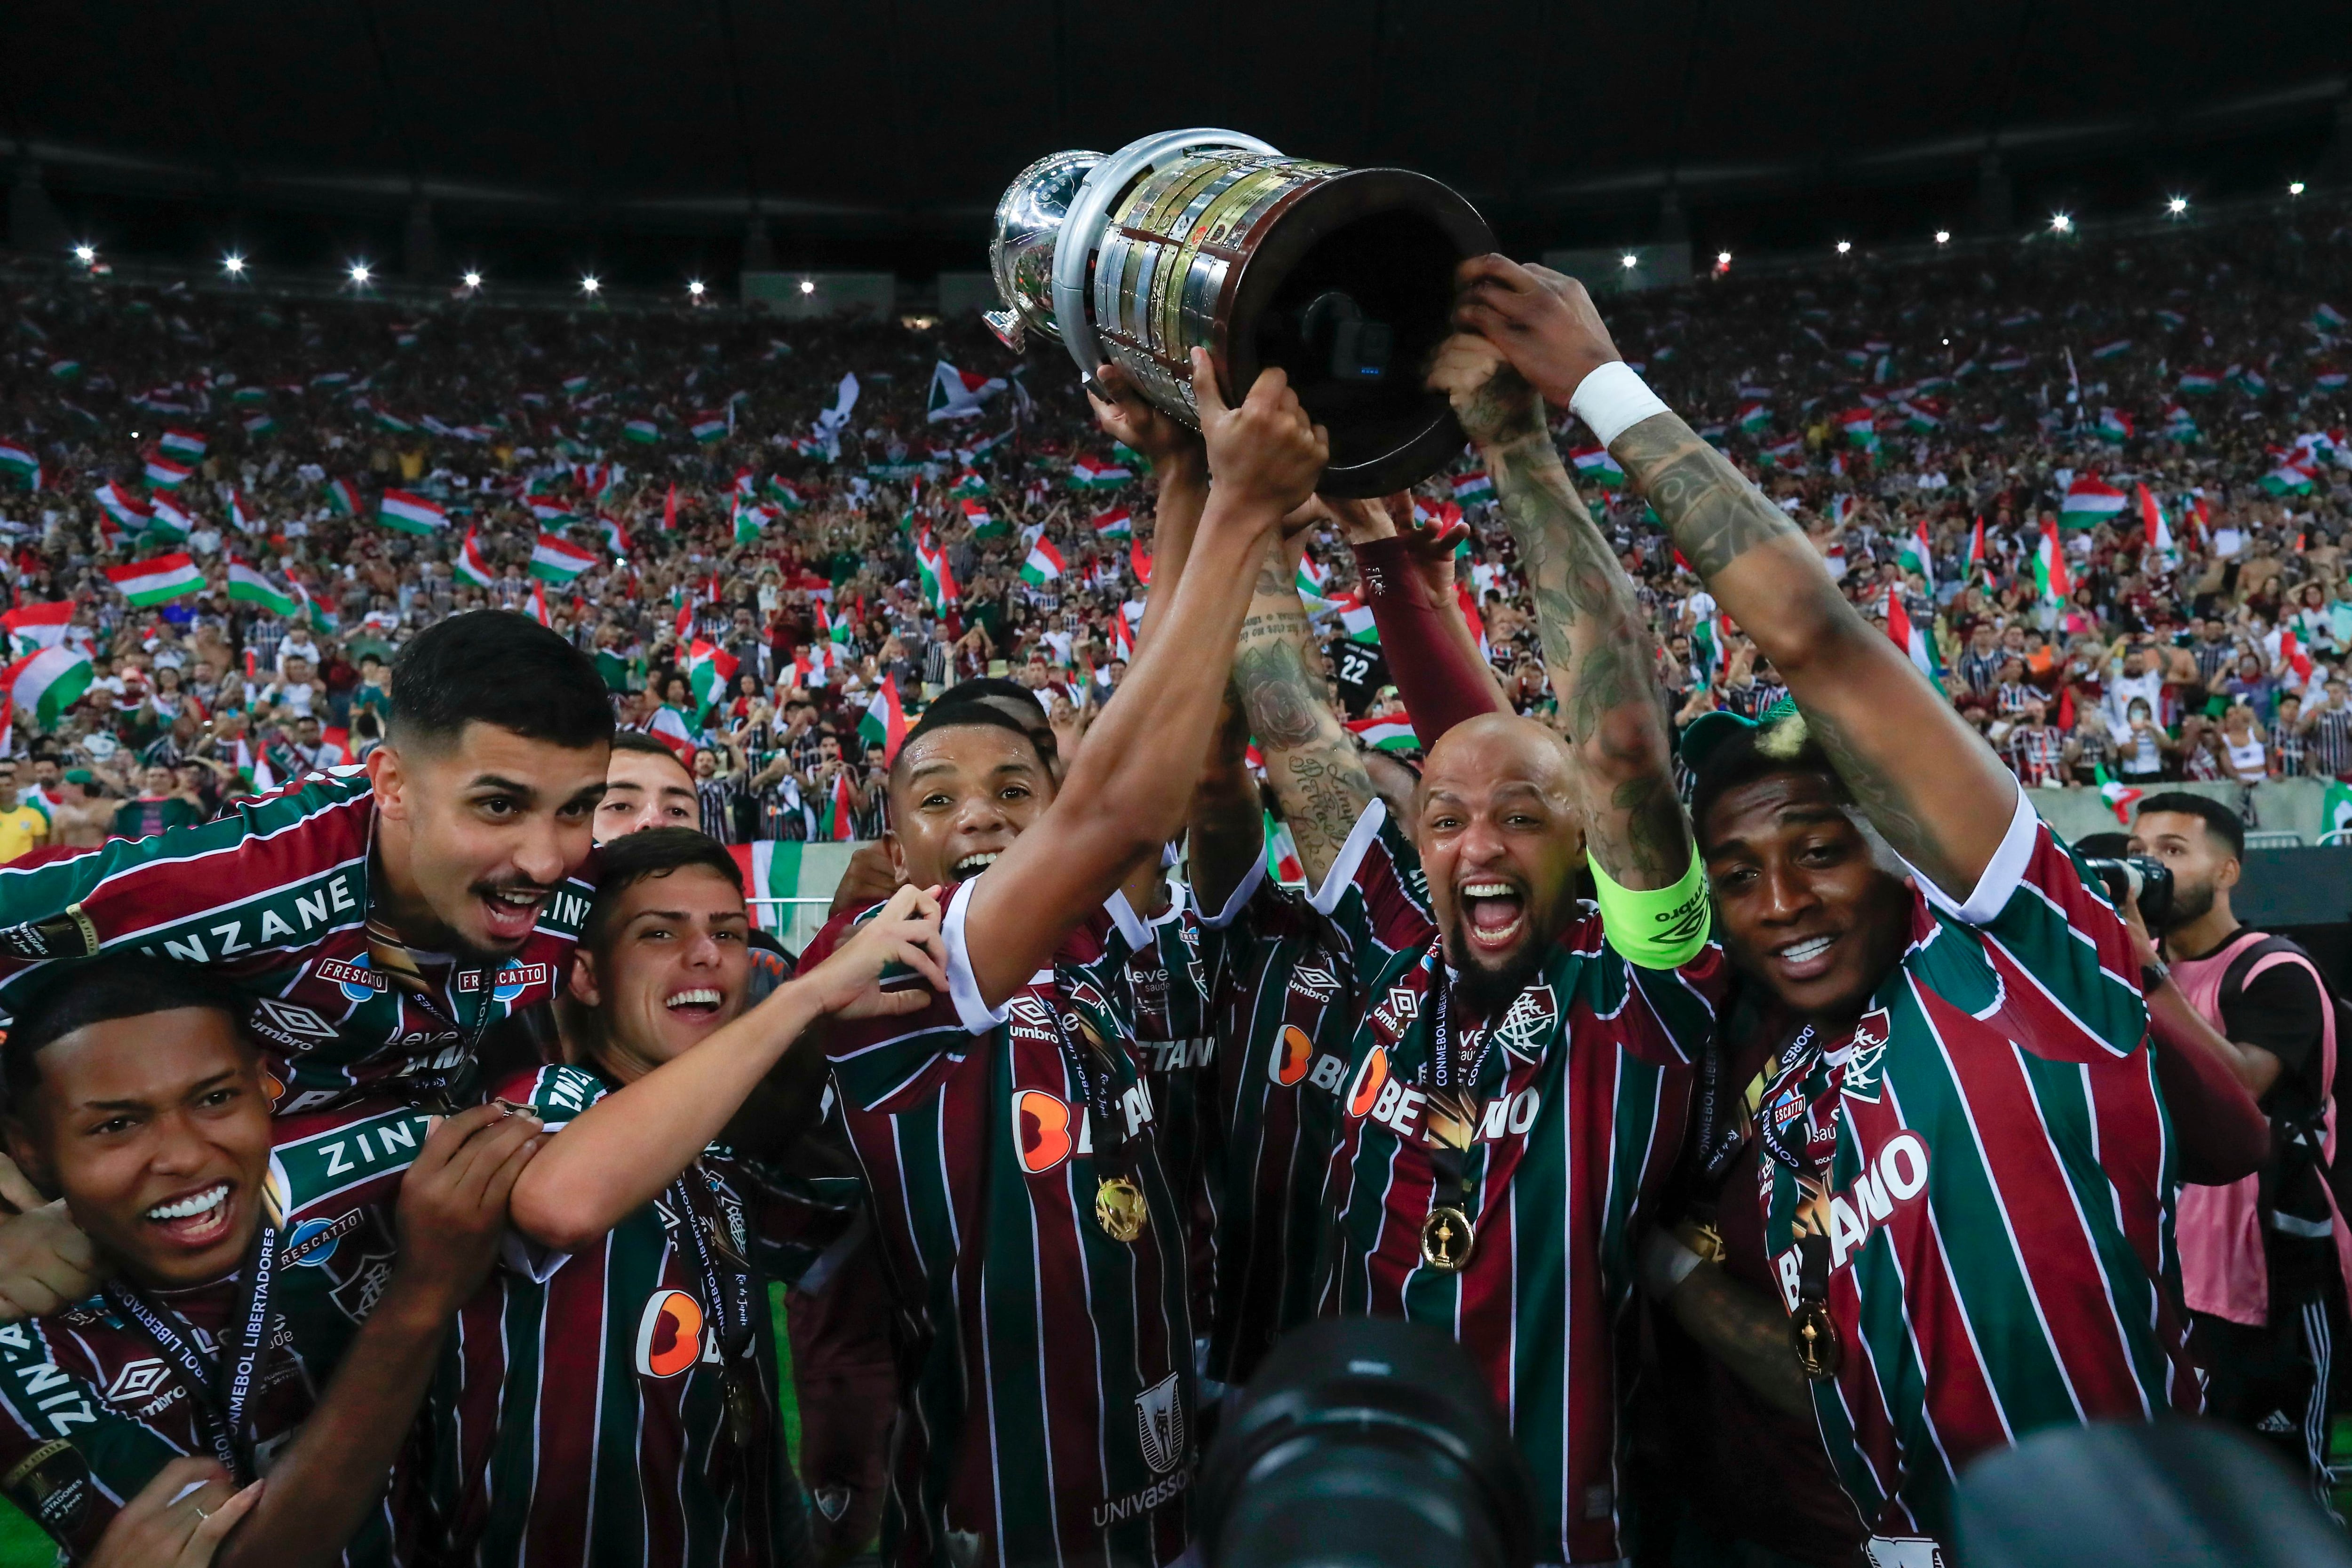 How did Fluminense qualify for the FIFA Club World Cup?